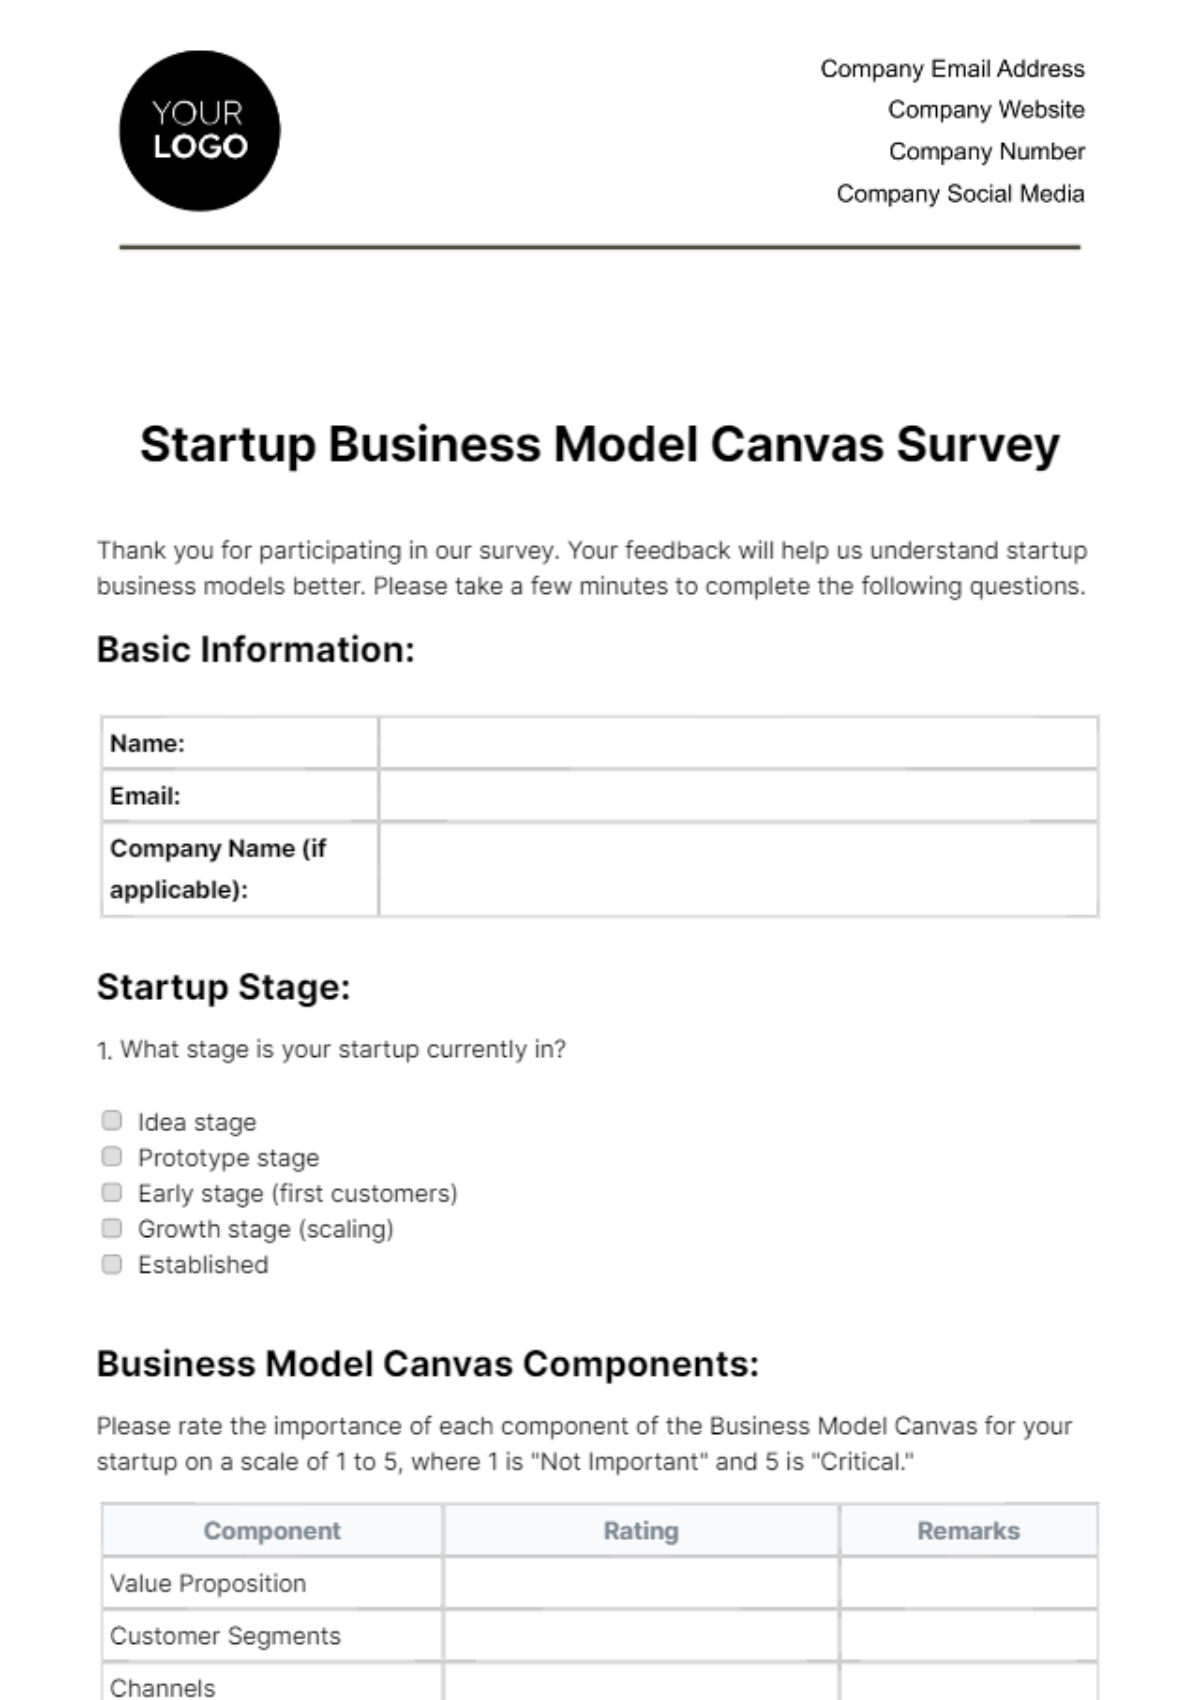 Free Startup Business Model Canvas Survey Template